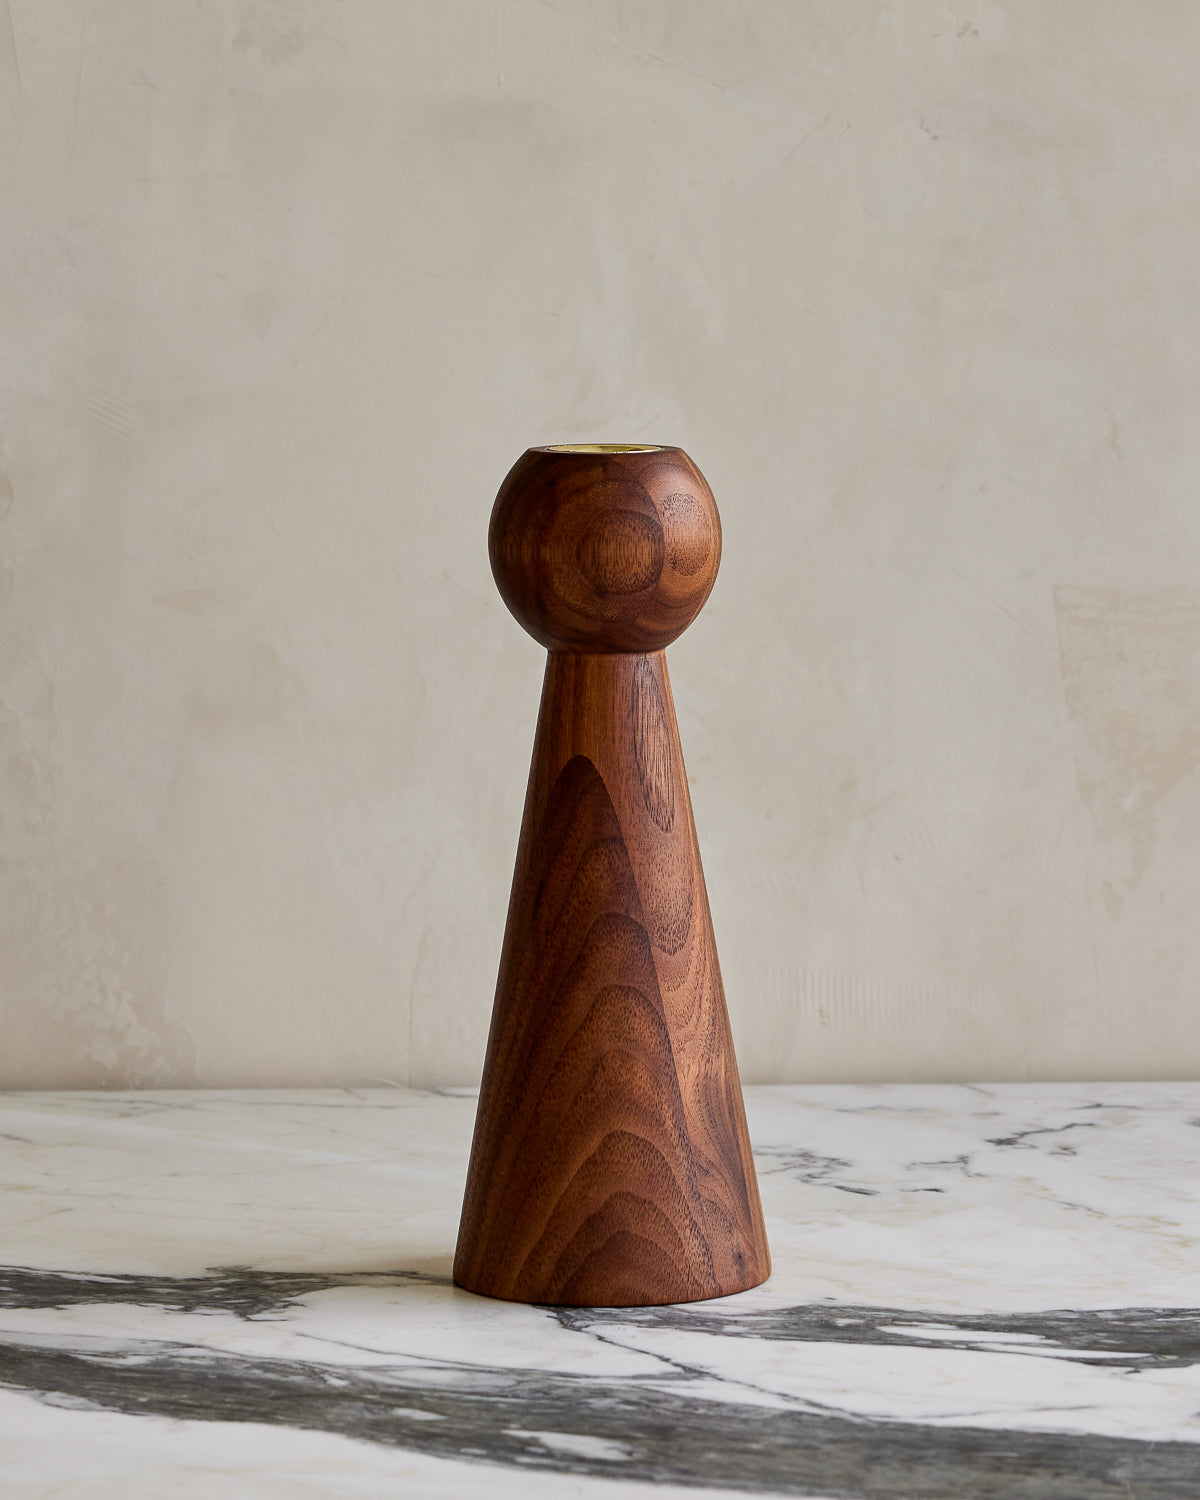 Black walnut Bella wooden candle holder with gently tapered base